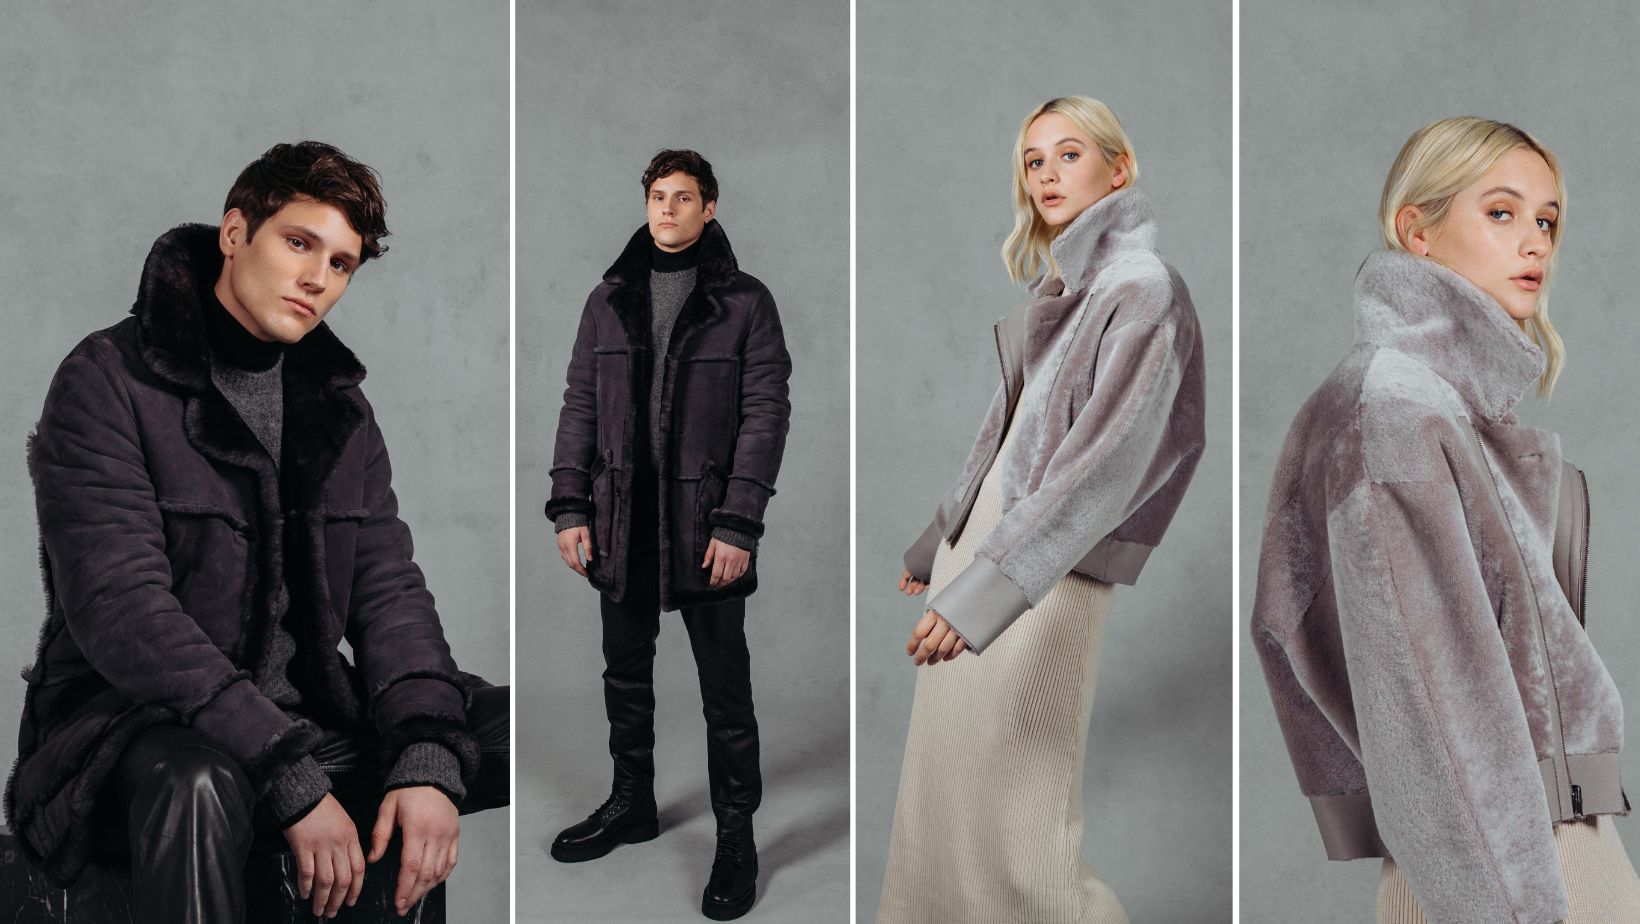 From left to right: Rebel: Black Nappa Ironed Wool. Shearling. Fits true to size, Reversible. Comfortable fit in the shoulders and chest, straight cut through the torso when worn wool in. Looser fit in the shoulders, chest and torso when worn wool out. Notch lapel, Interior zipper pockets, 34 inch Length. Calm: NIMBUS NAPPA SHORT WOOL. Shearling. Reversible. Long sleeves with relaxed deep armhole. Pull through pockets. 20 inch length. 